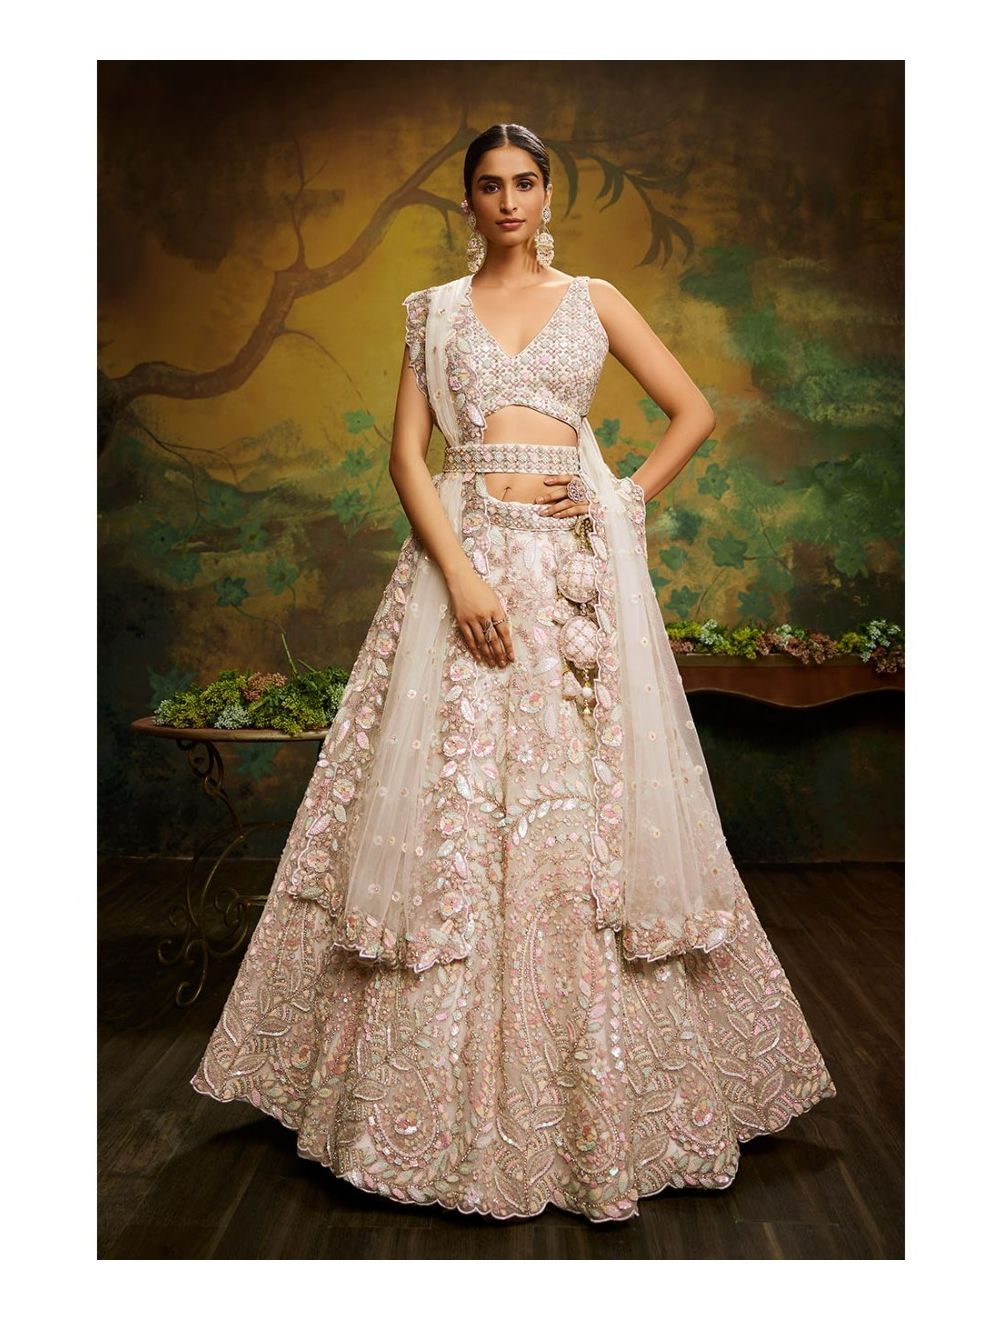 Aggregate 175+ lehenga for wedding party best